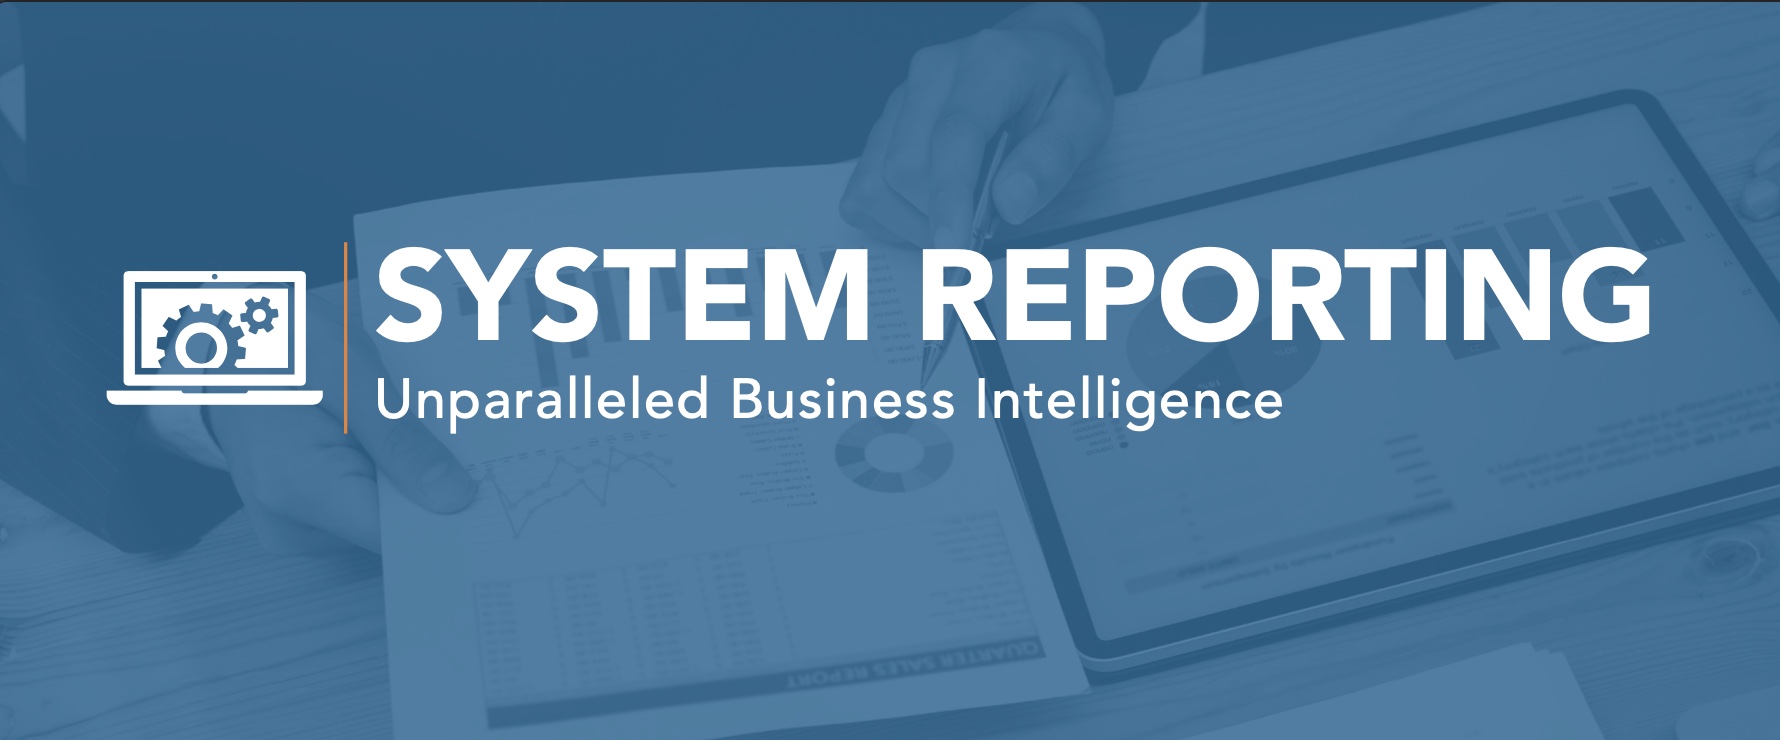 System Reporting Data Sheet